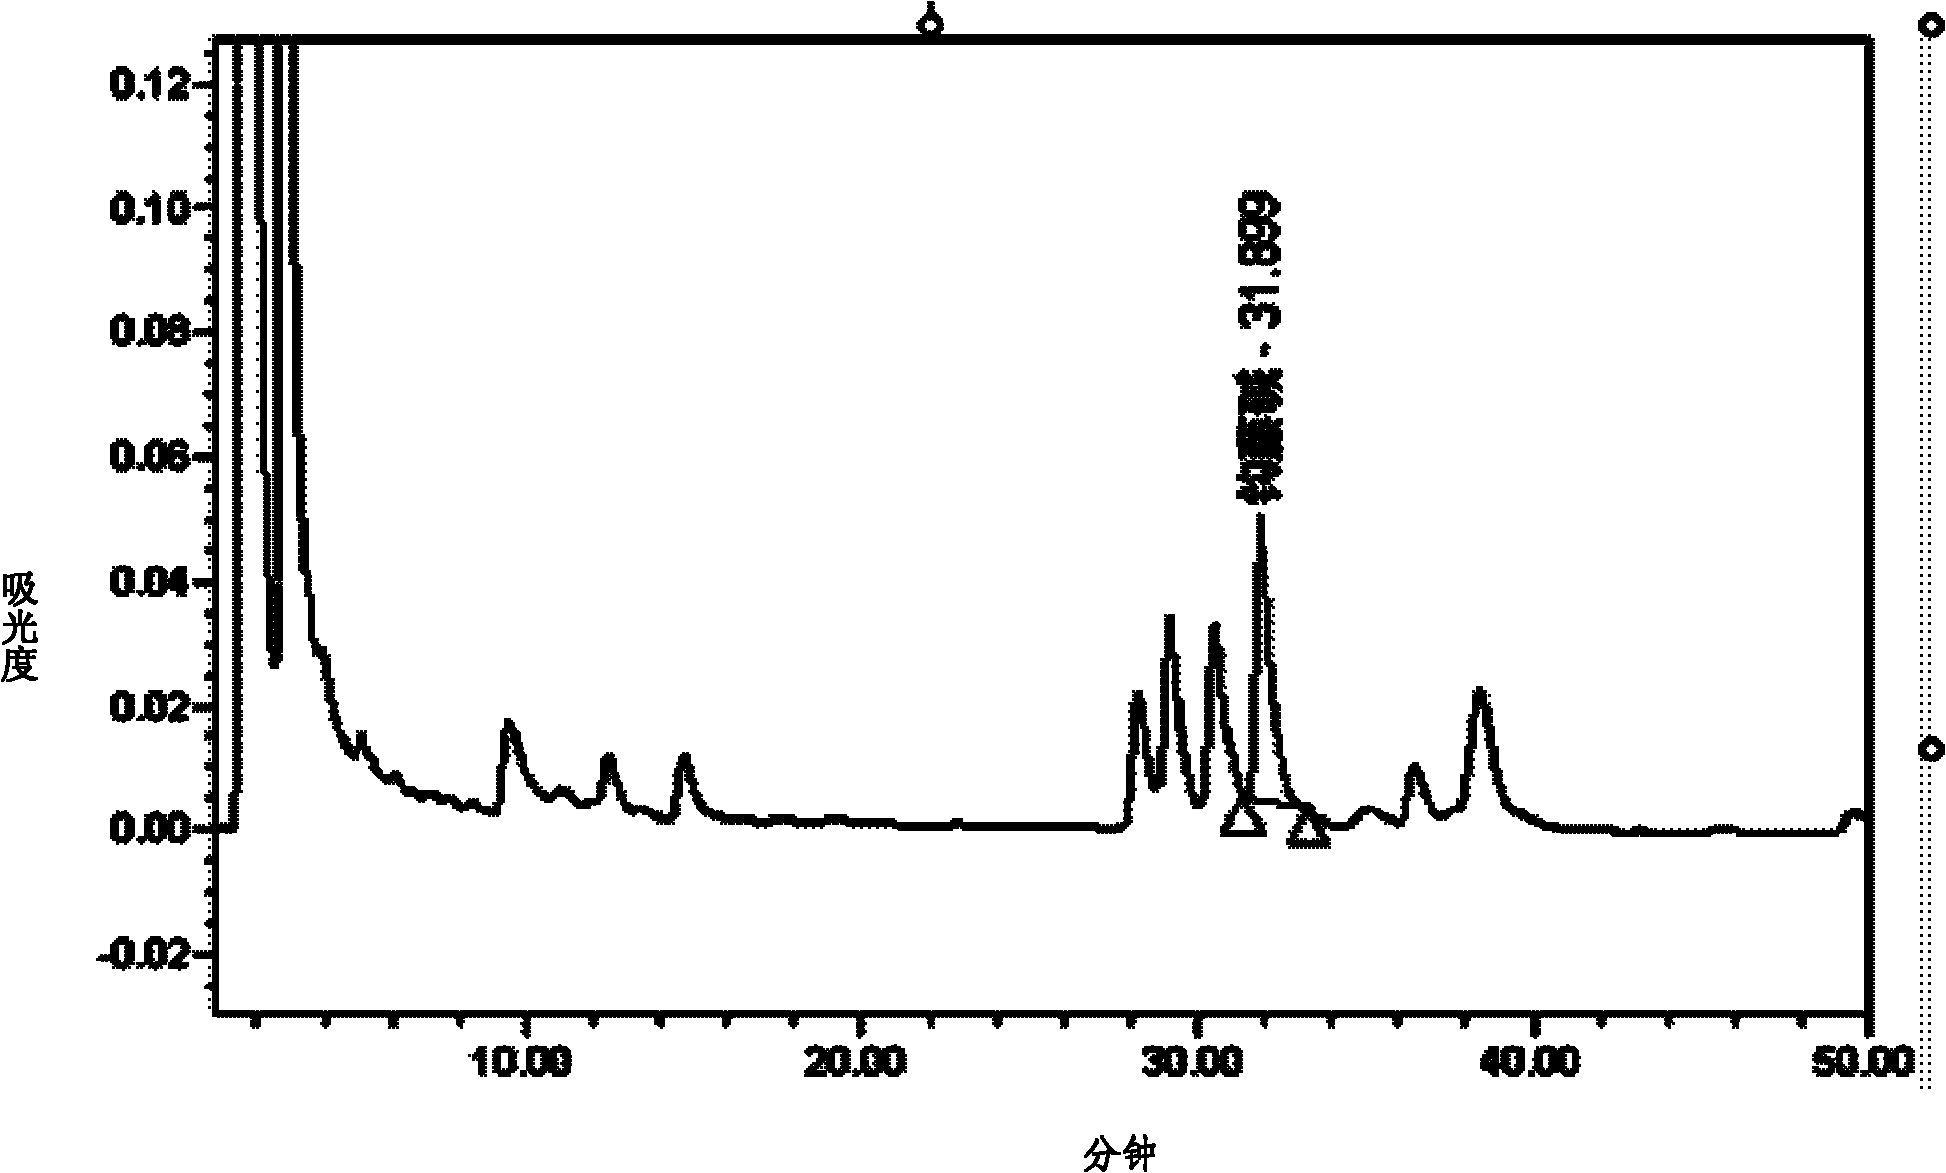 Process for extracting rhynchophylline monomers from uncaria rhynchophylla